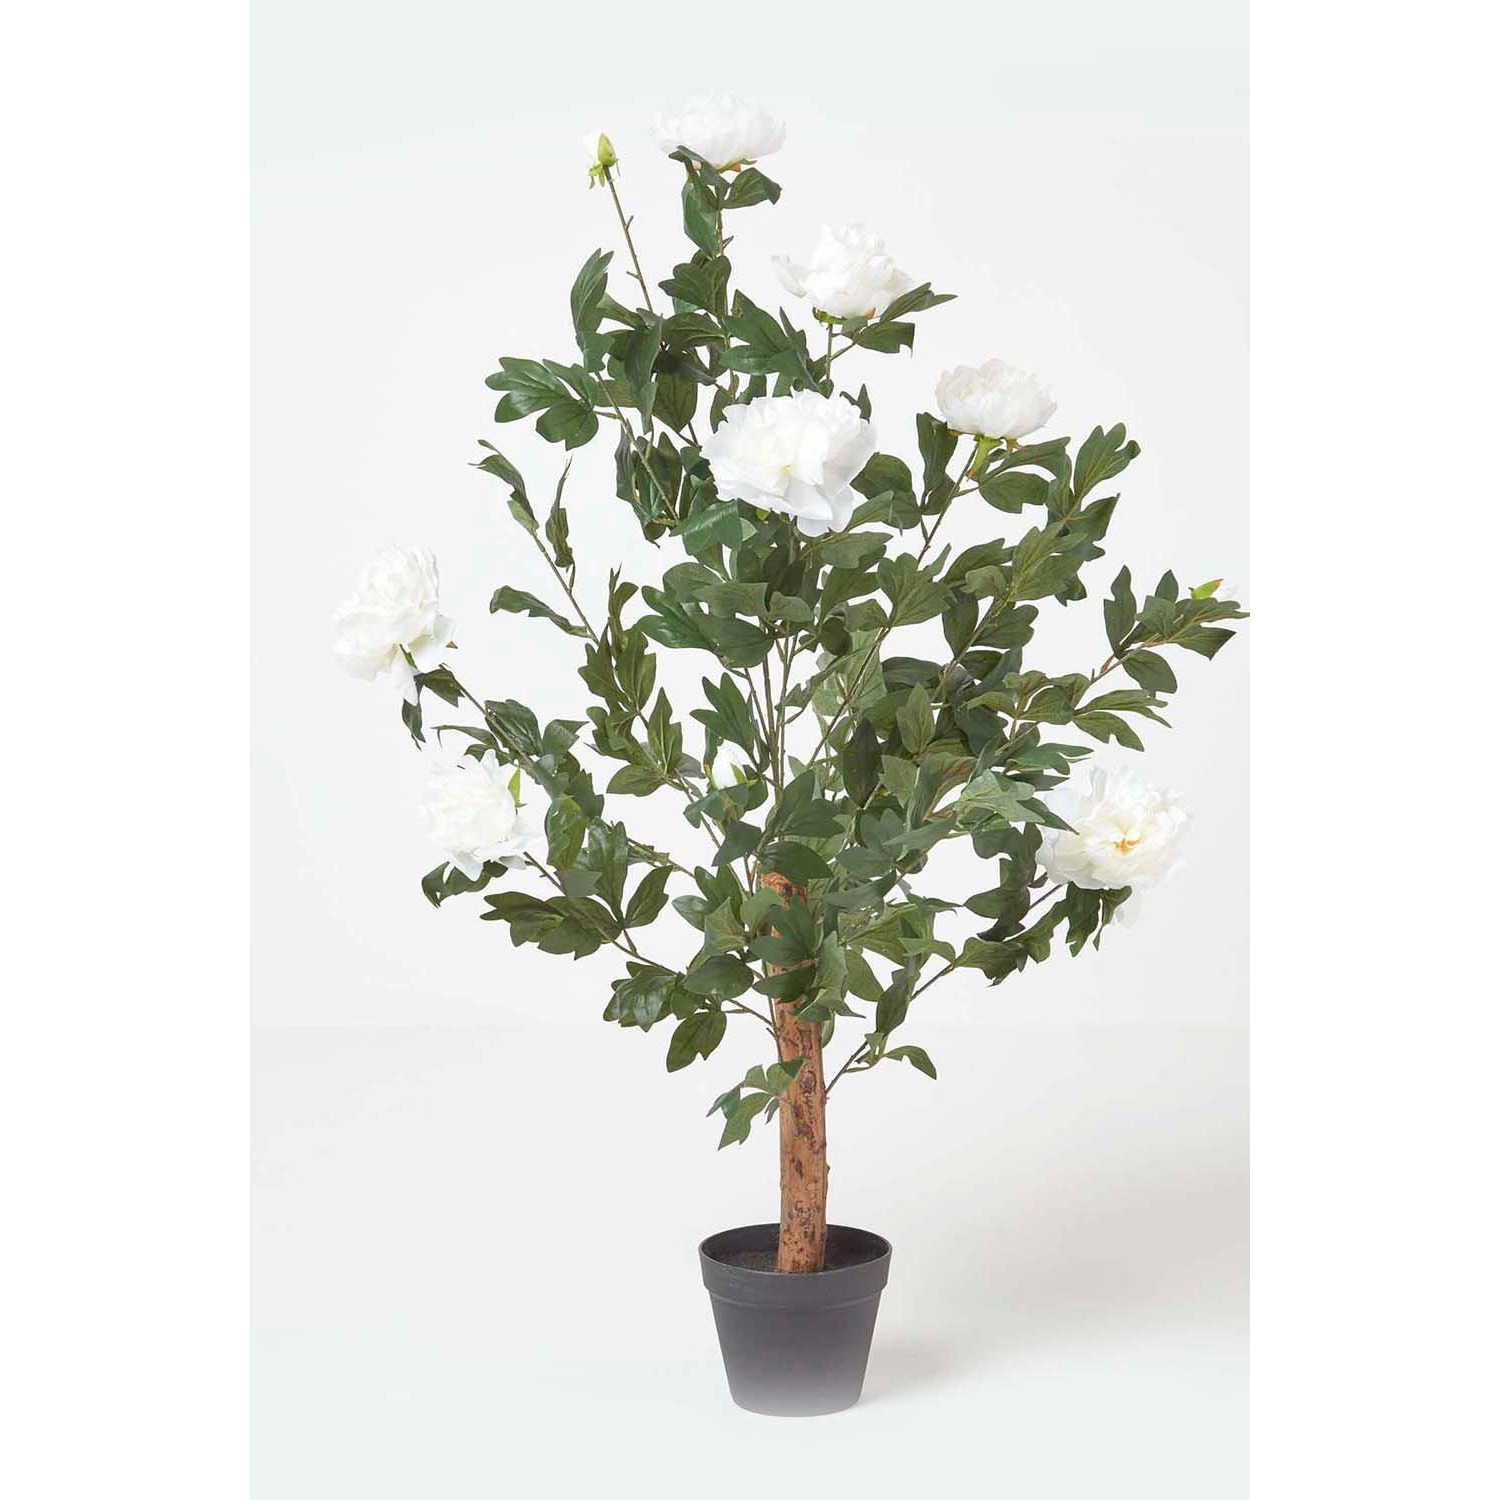 Artificial Peony Tree in Black Pot, 100 cm Tall - image 1